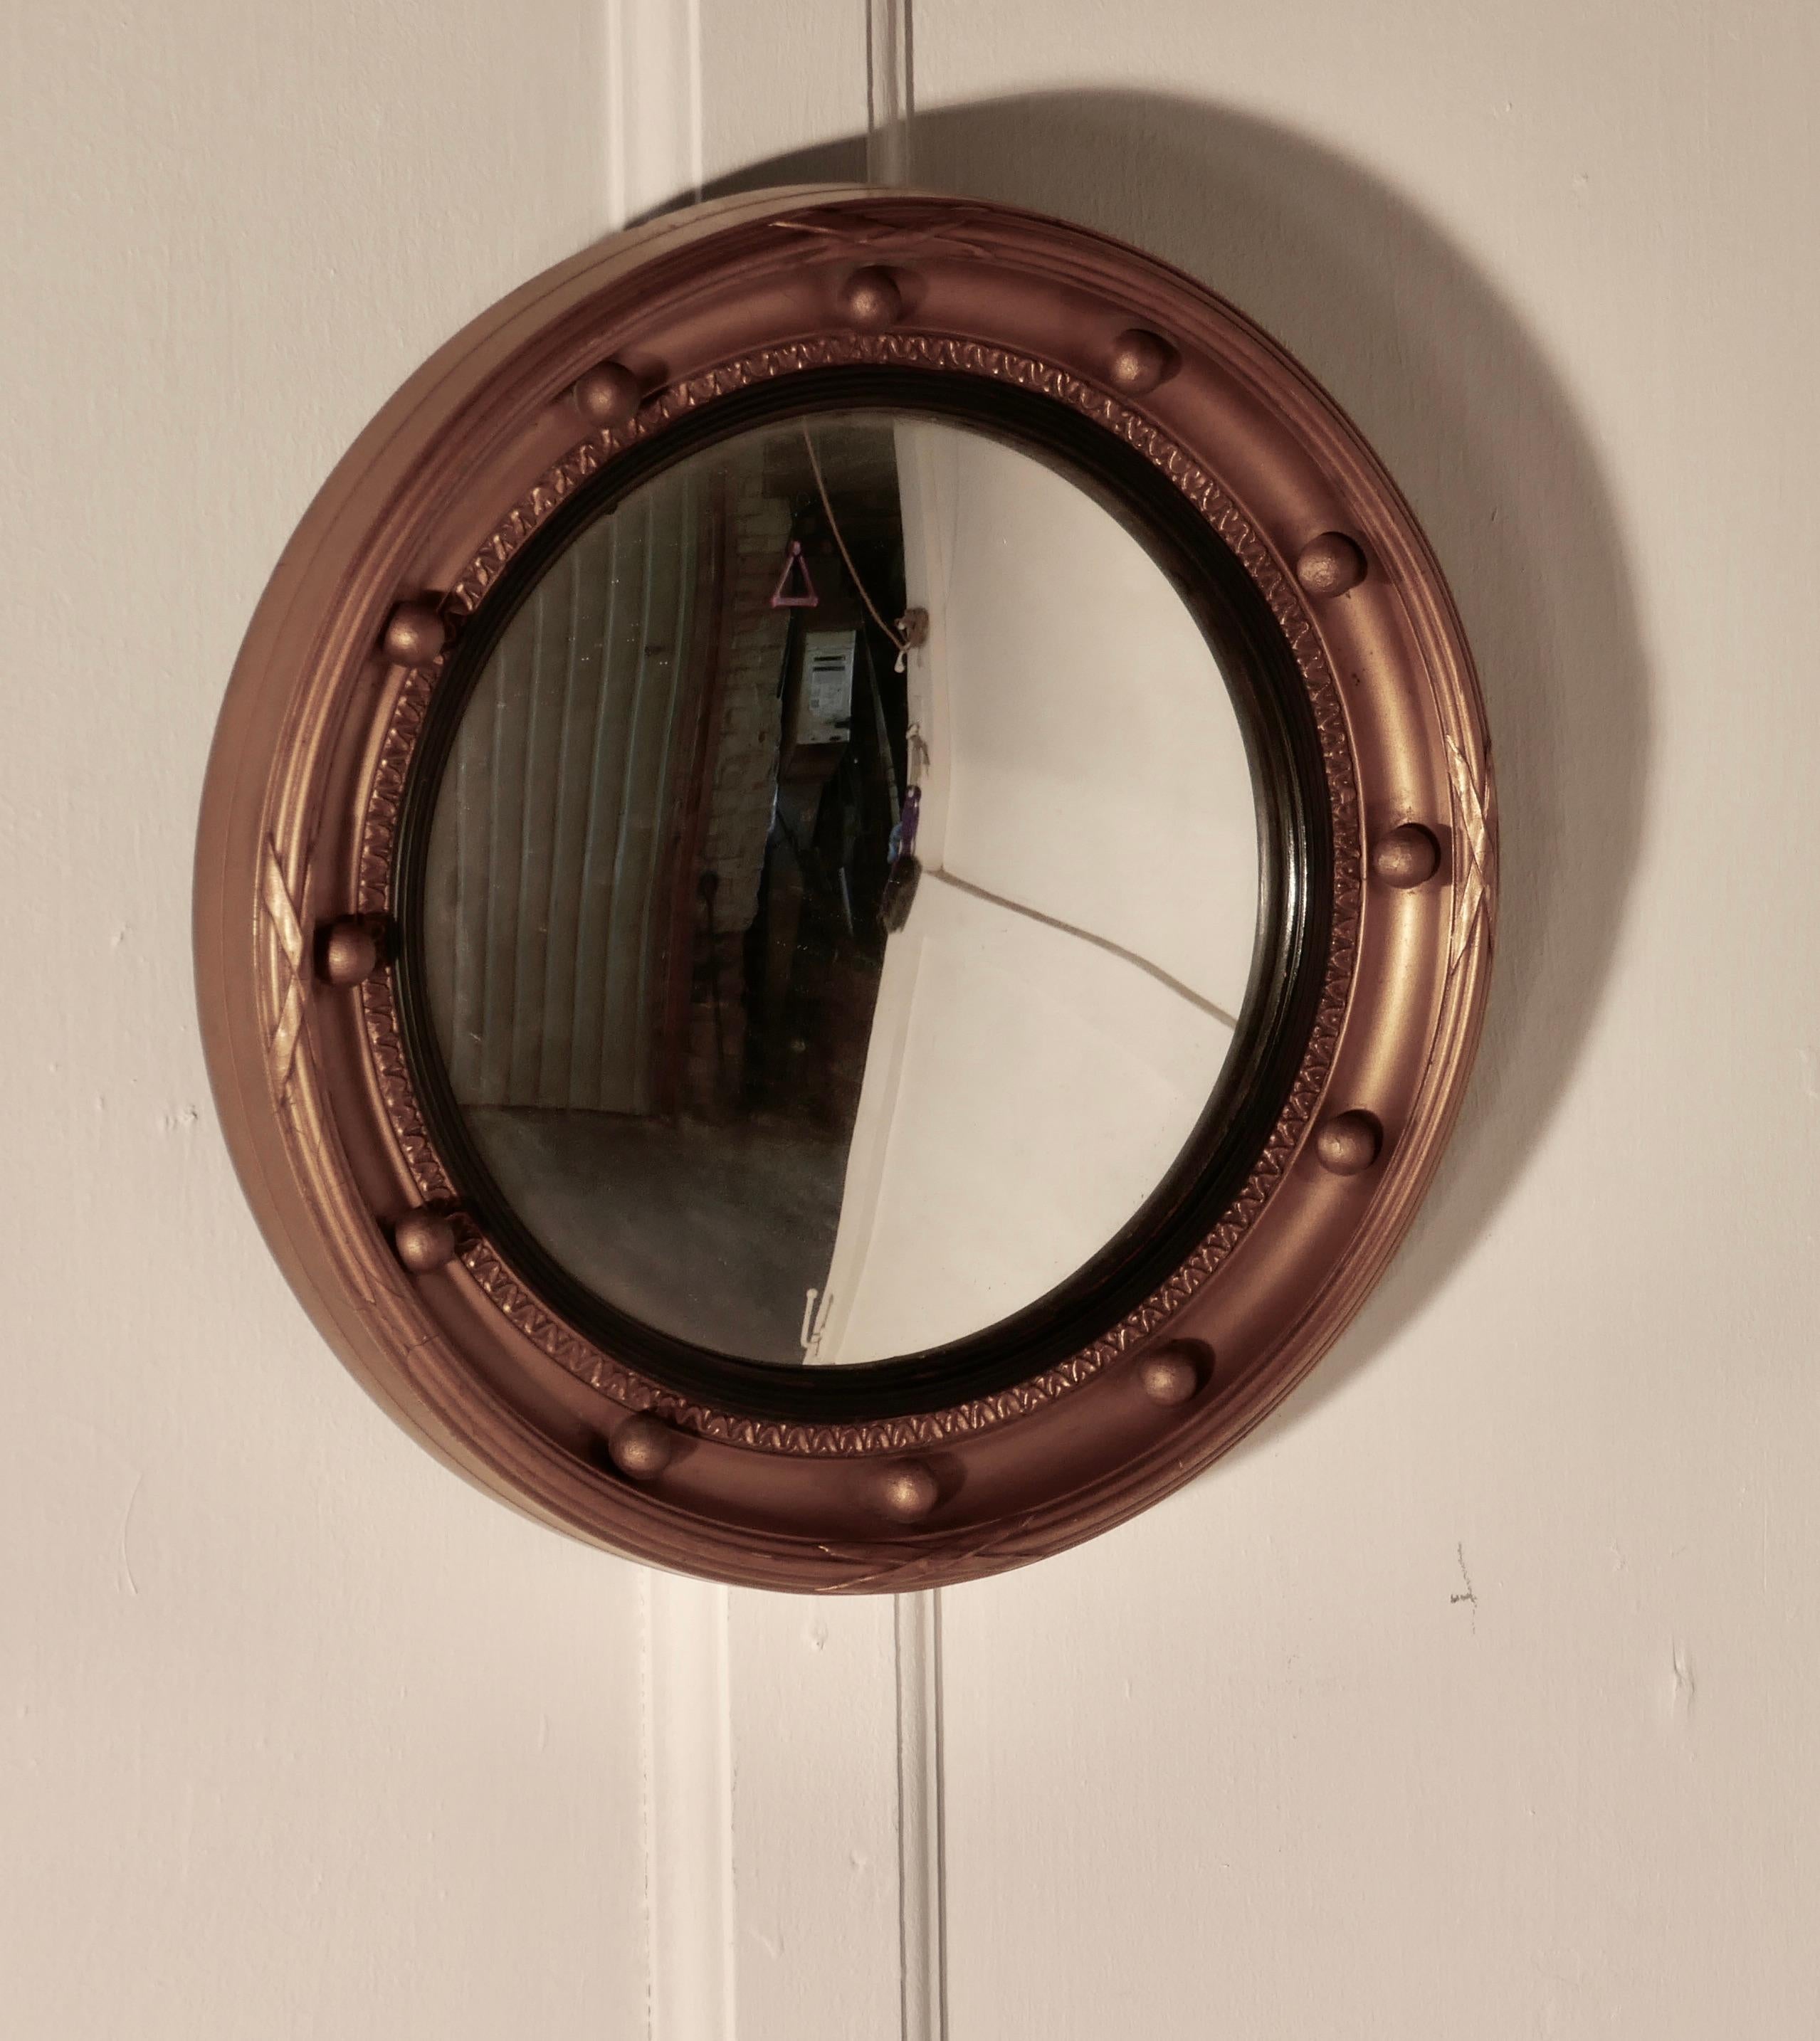 Regency convex gilt wall mirror 


This stunning mirror has a deep gilt frame decorated with spheres, the convex glass is held with a reeded ebony mount

The large 2.5” round frame is in sound condition as is the original convex looking